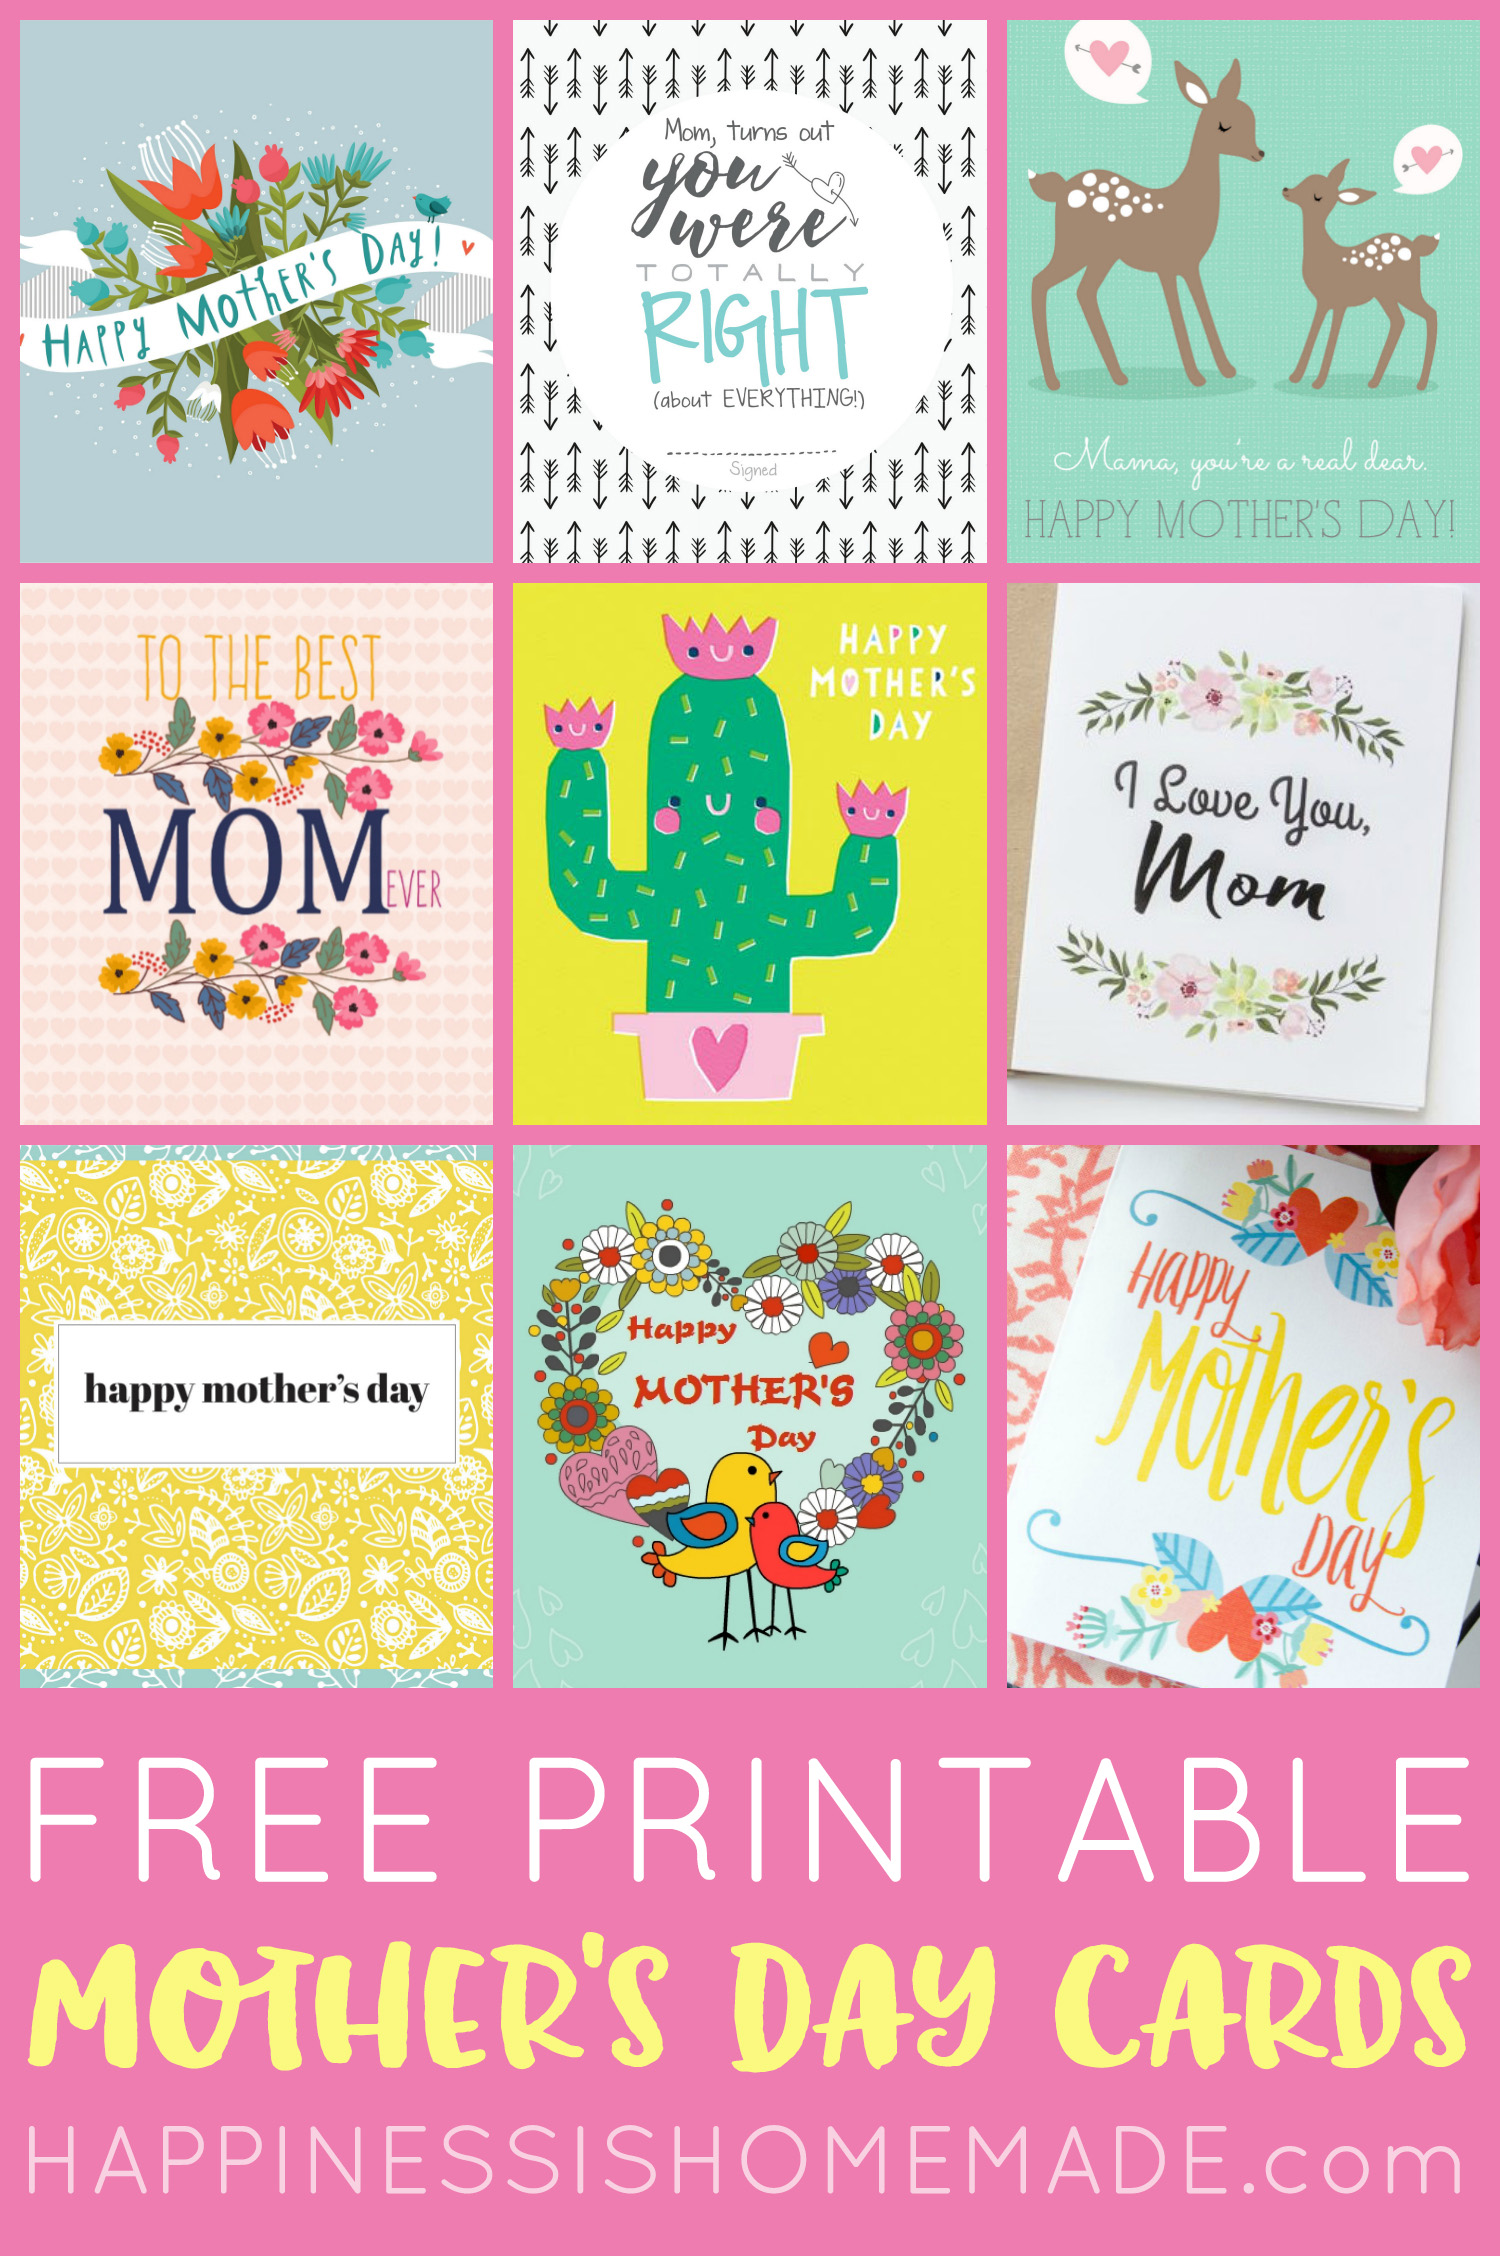 free-printable-mother-s-day-cards-happiness-is-homemade